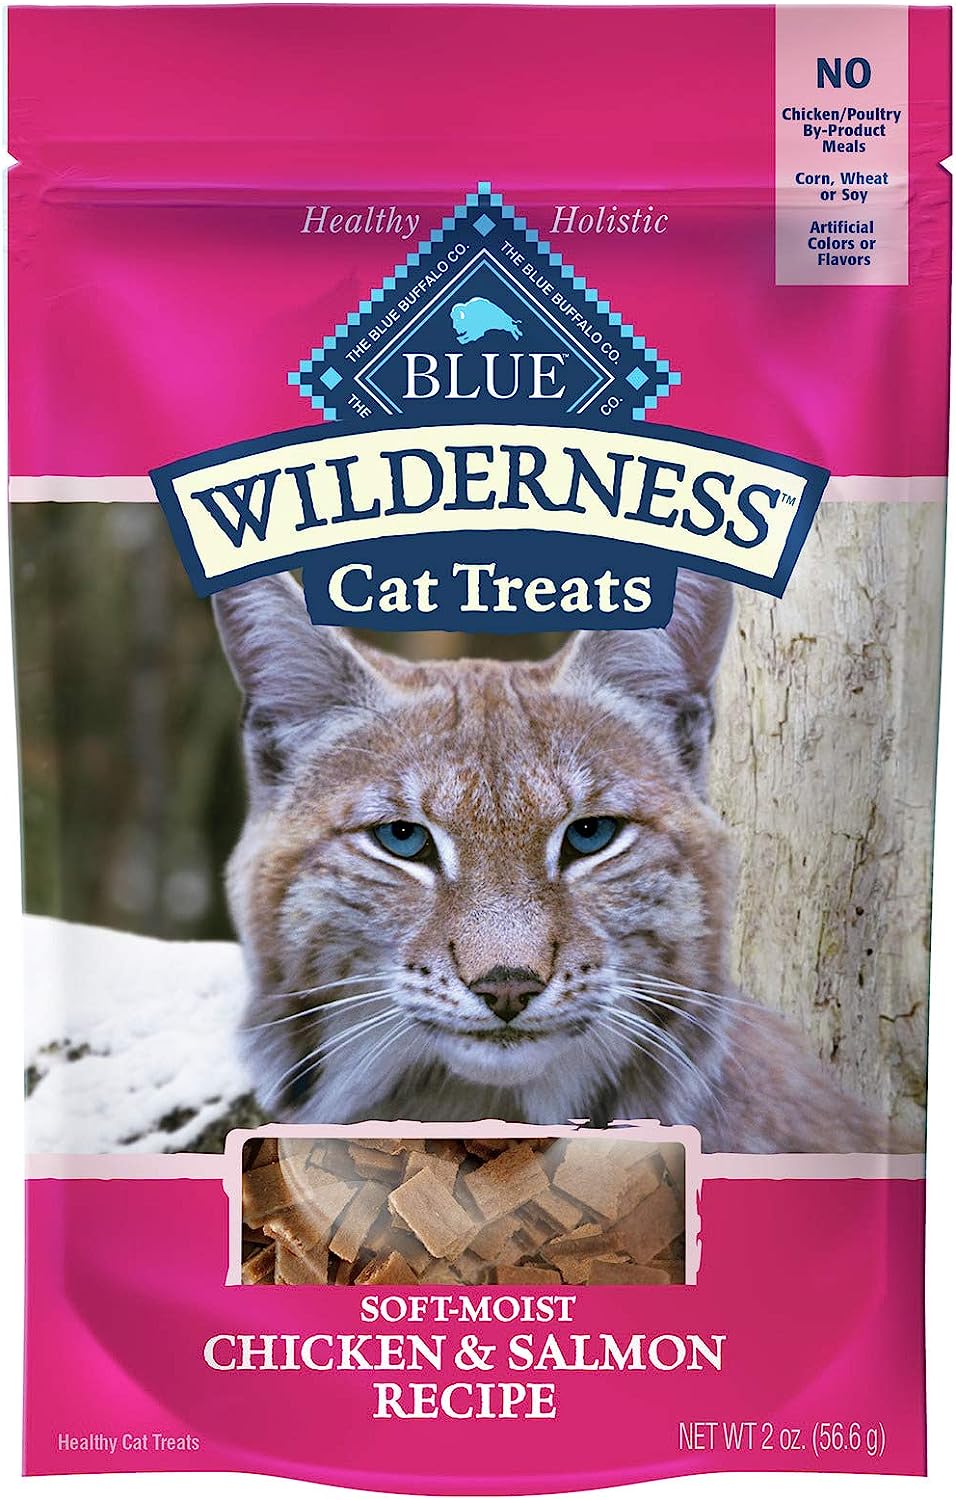 Buy 3, Get 2 Pet Treats (Dog & Cat): 5-Count 2-Oz Blue Buffalo Wilderness Cat Treats $8.19 ($1.64 each), More w/ S&S + Free Shipping w/ Prime or on $25+